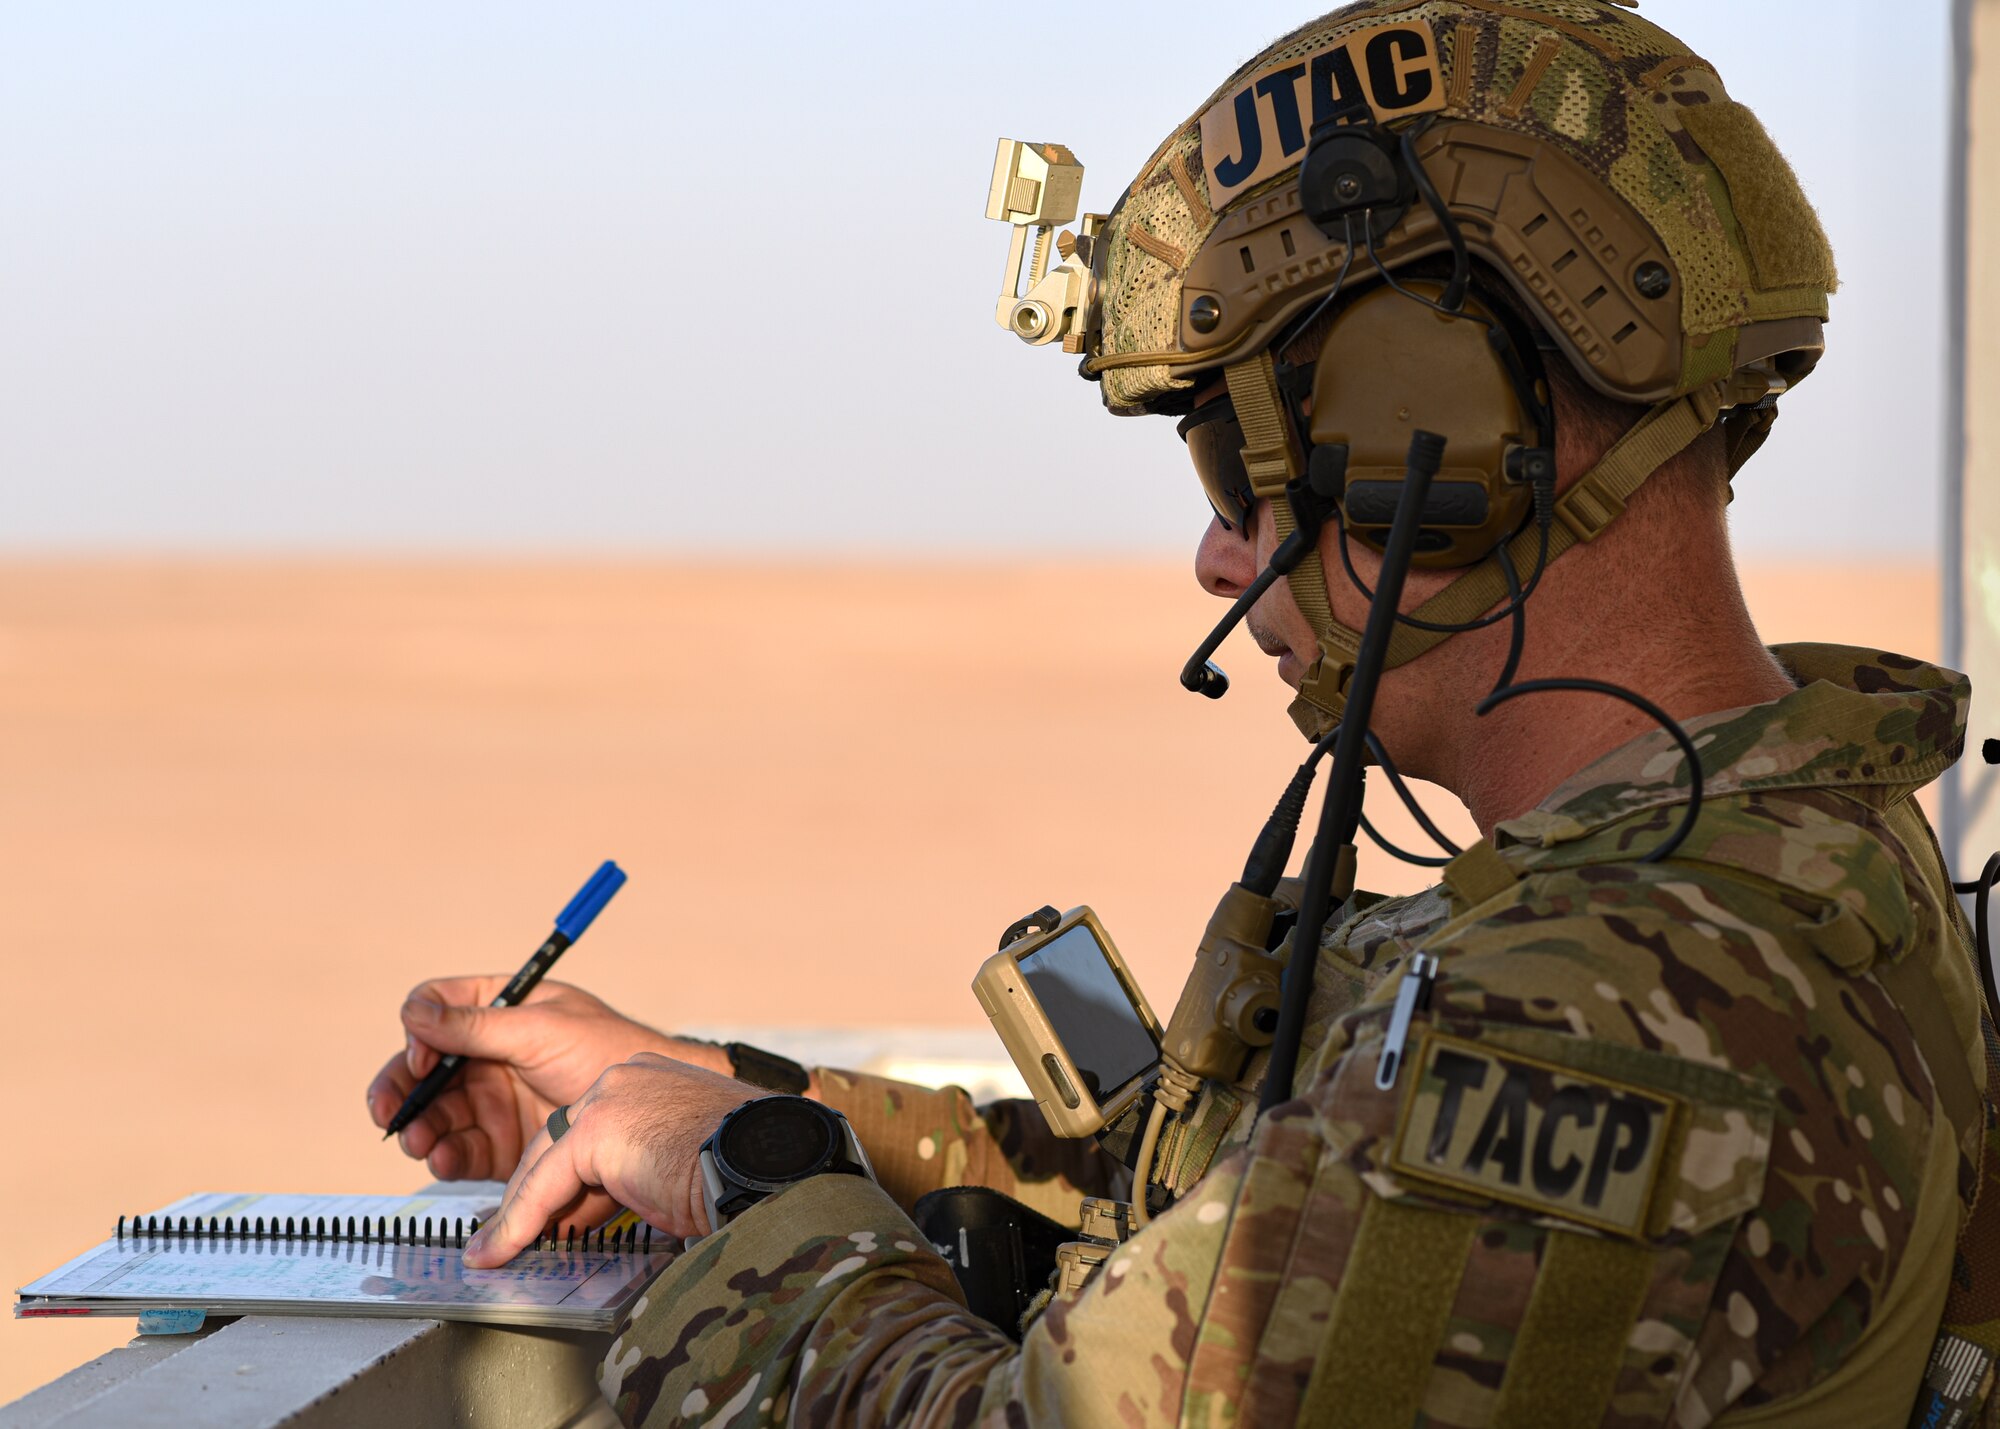 U.S. Air Force Tech. Sgt. Jason Waters, 82nd Expeditionary Air Support Operations Squadron joint terminal attack controller, reviews coordinates on a topographical map at Udairi Range, Kuwait, Oct. 21, 2021. USAF JTACs deployed to the 82nd EASOS, along with the U.S. Army 1st Battalion 194th Armor Regiment joint fires observers in-training, and the Italian Air Force (Aeronautica Militare) Task Group Typhoon practiced close air support, fostered enduring partnerships and advanced its decisive combat dominance during a live-fire training exercise. (U.S. Air Force photo by Staff Sgt. Ryan Brooks)